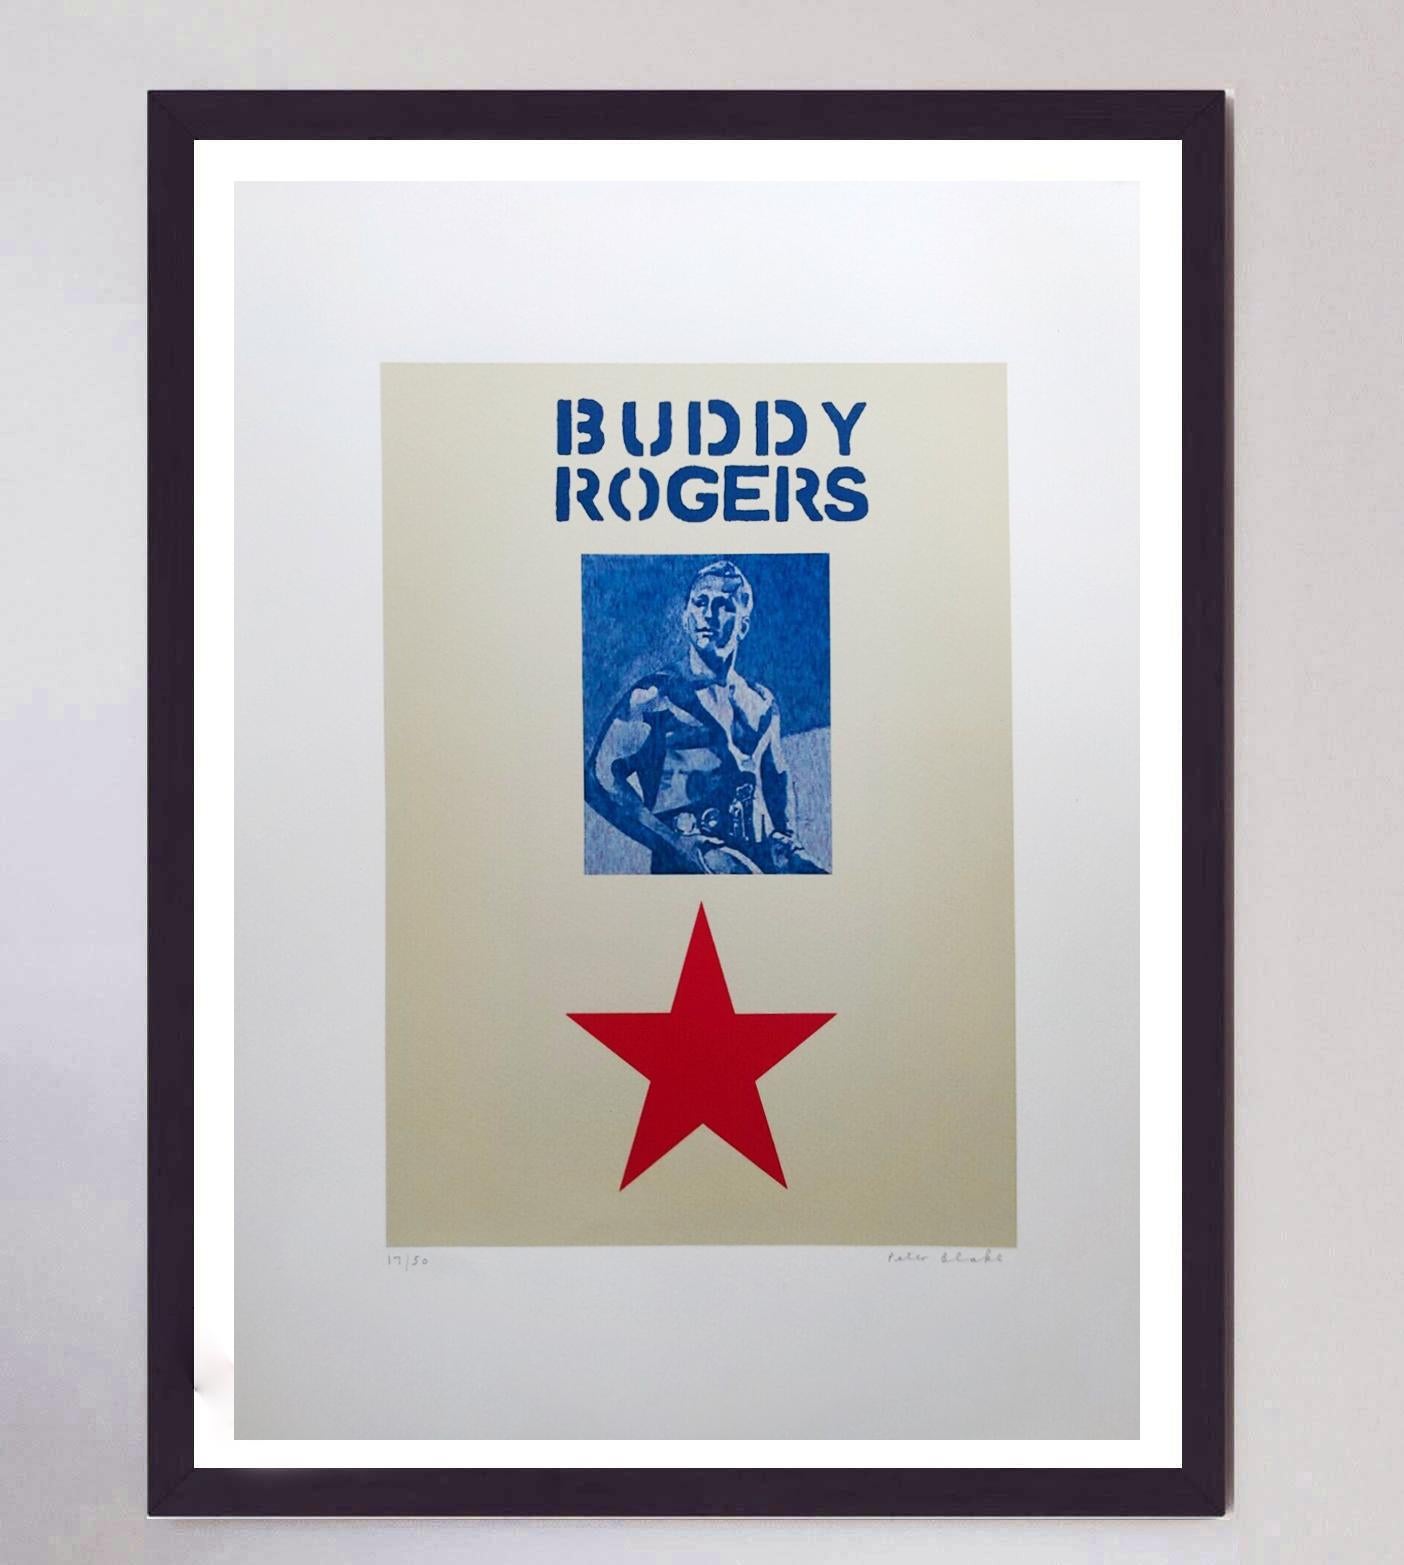 2003 Peter Blake - Buddy Rogers - Motif 10 Original Signed Art Print In Good Condition For Sale In Winchester, GB